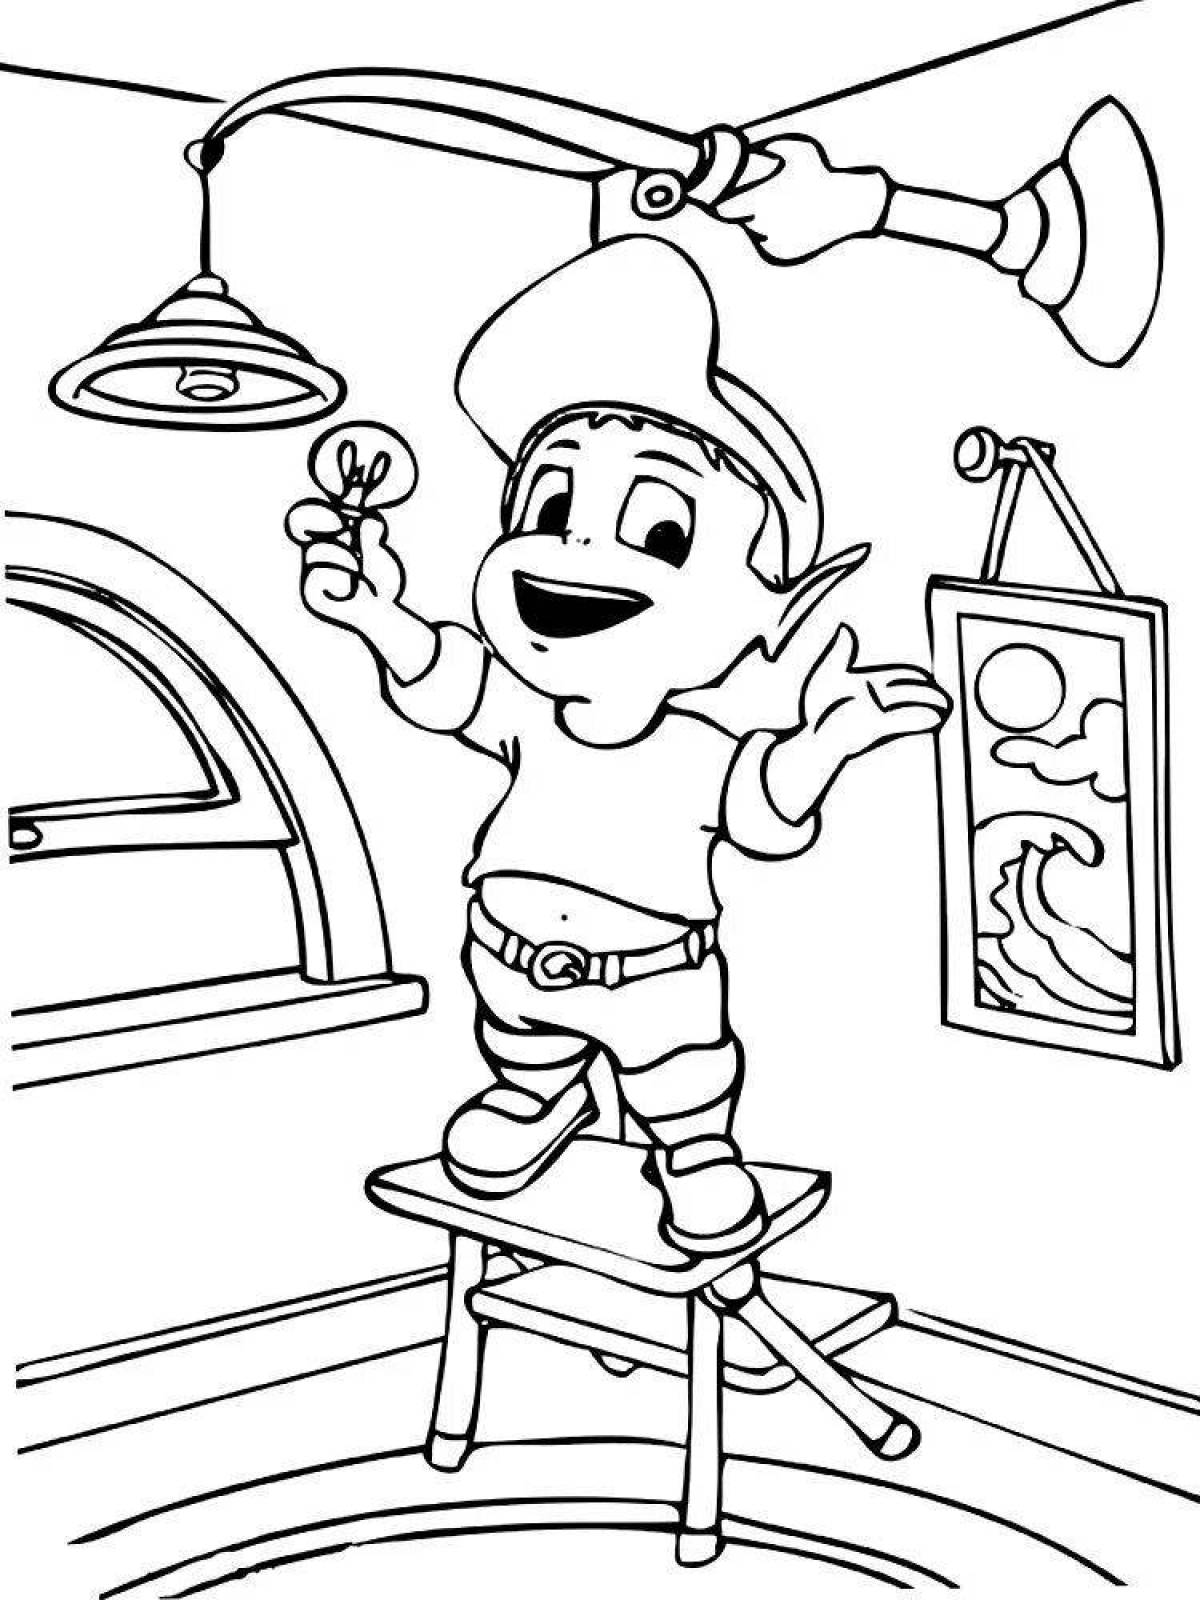 Creative Child Safety Coloring Page